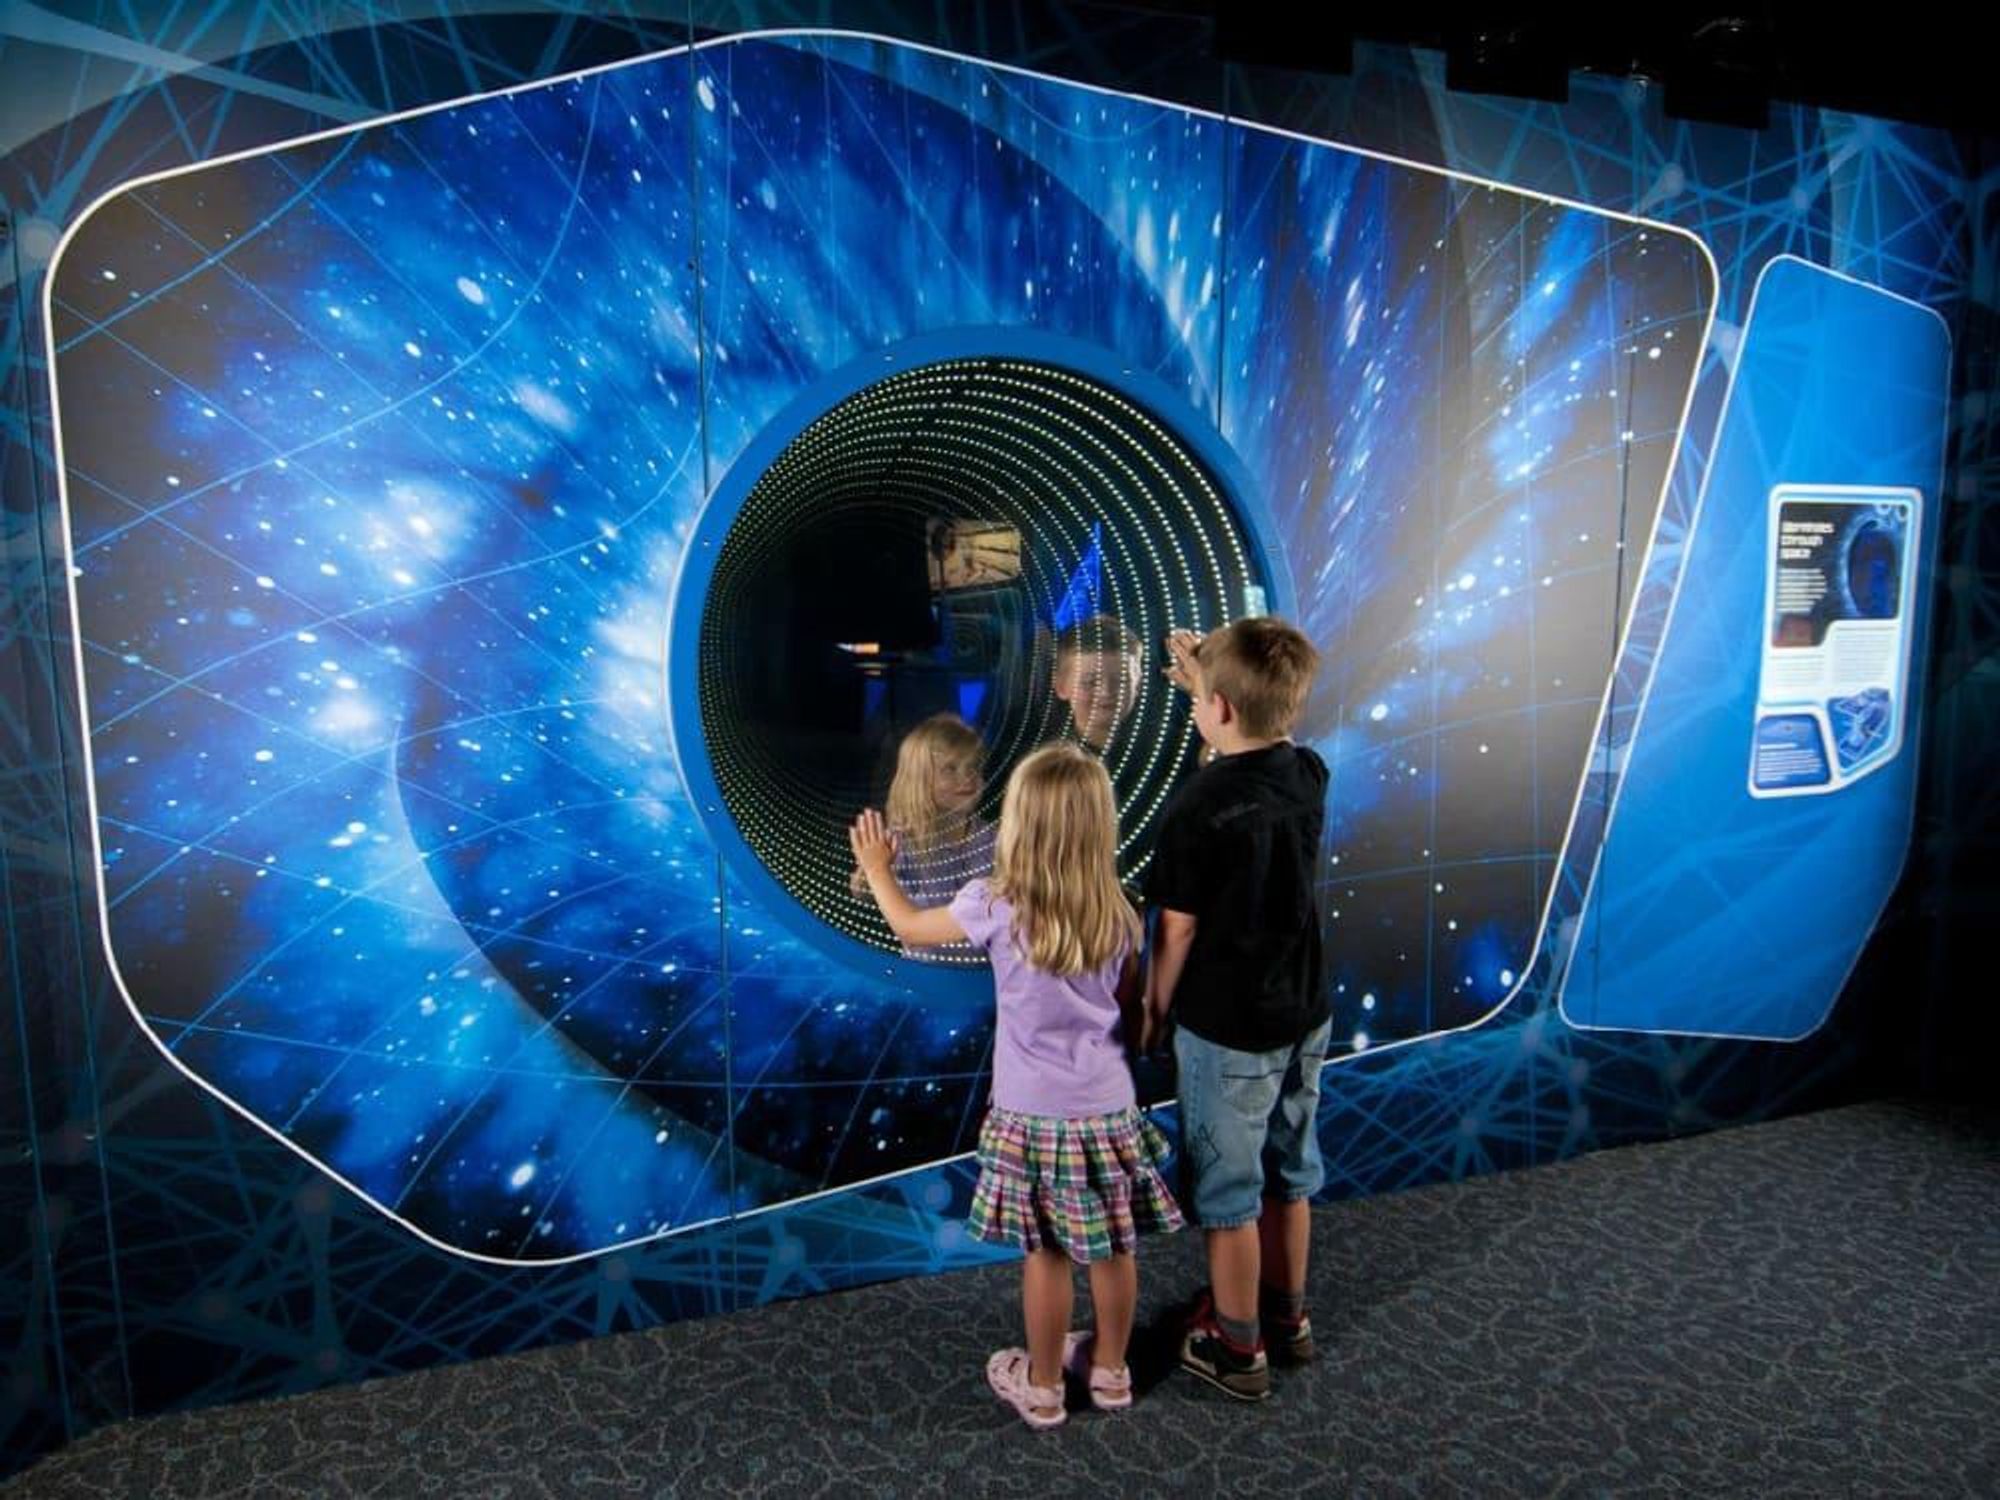 Space Center Houston presents Science Fiction, Science Future